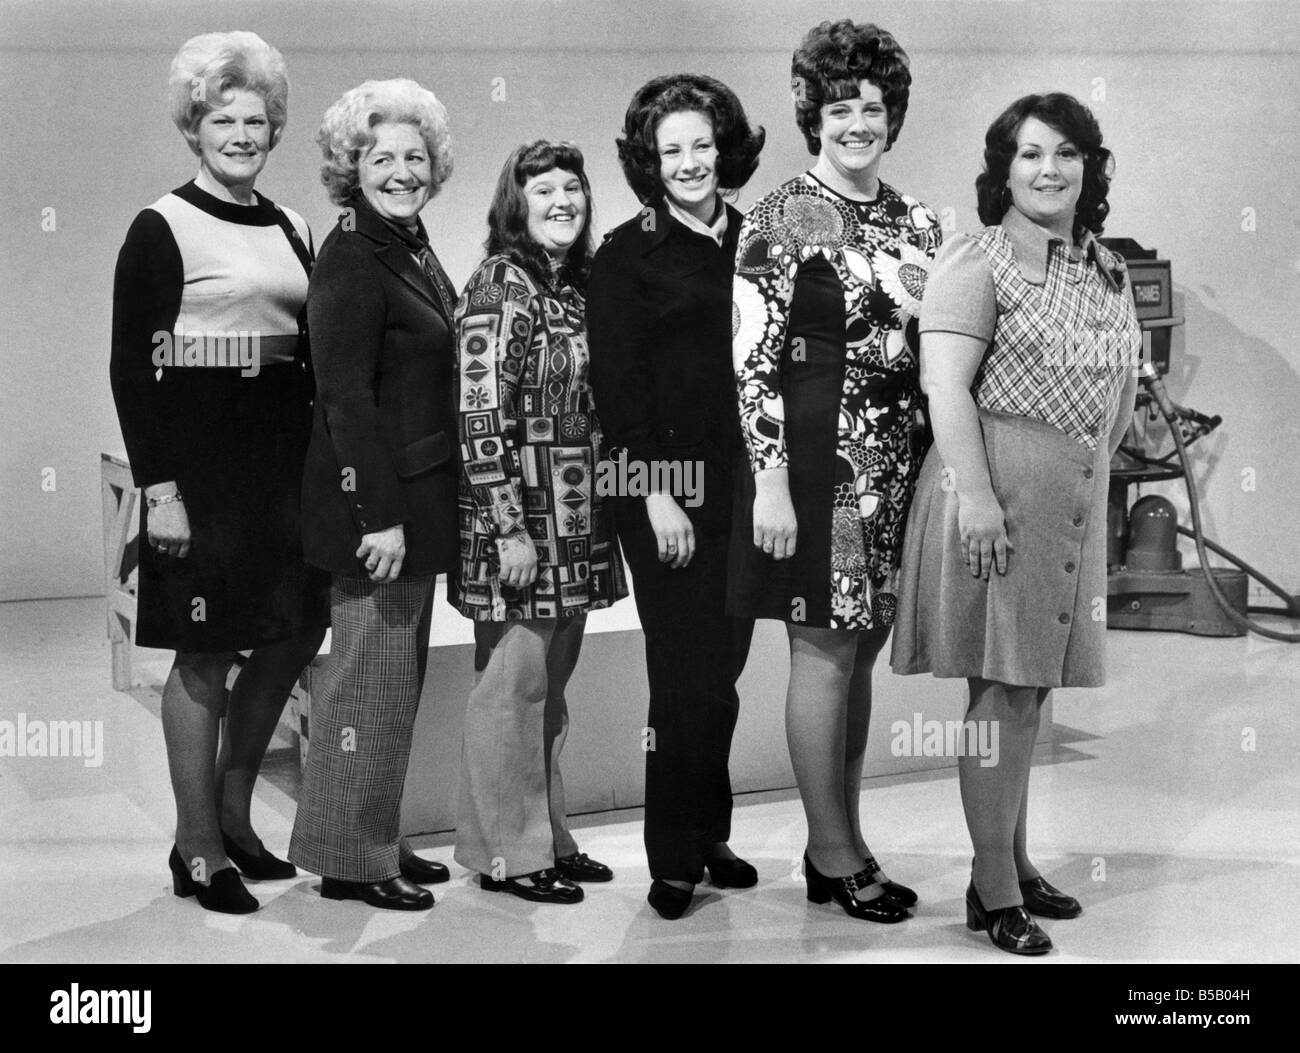 Slimmers Thelma Bennett, Celia Butler, Jean Middlemass, Donnette Britton, Rosina Ritchie, and Kathleen Humphrys, November 1972 Stock Photo